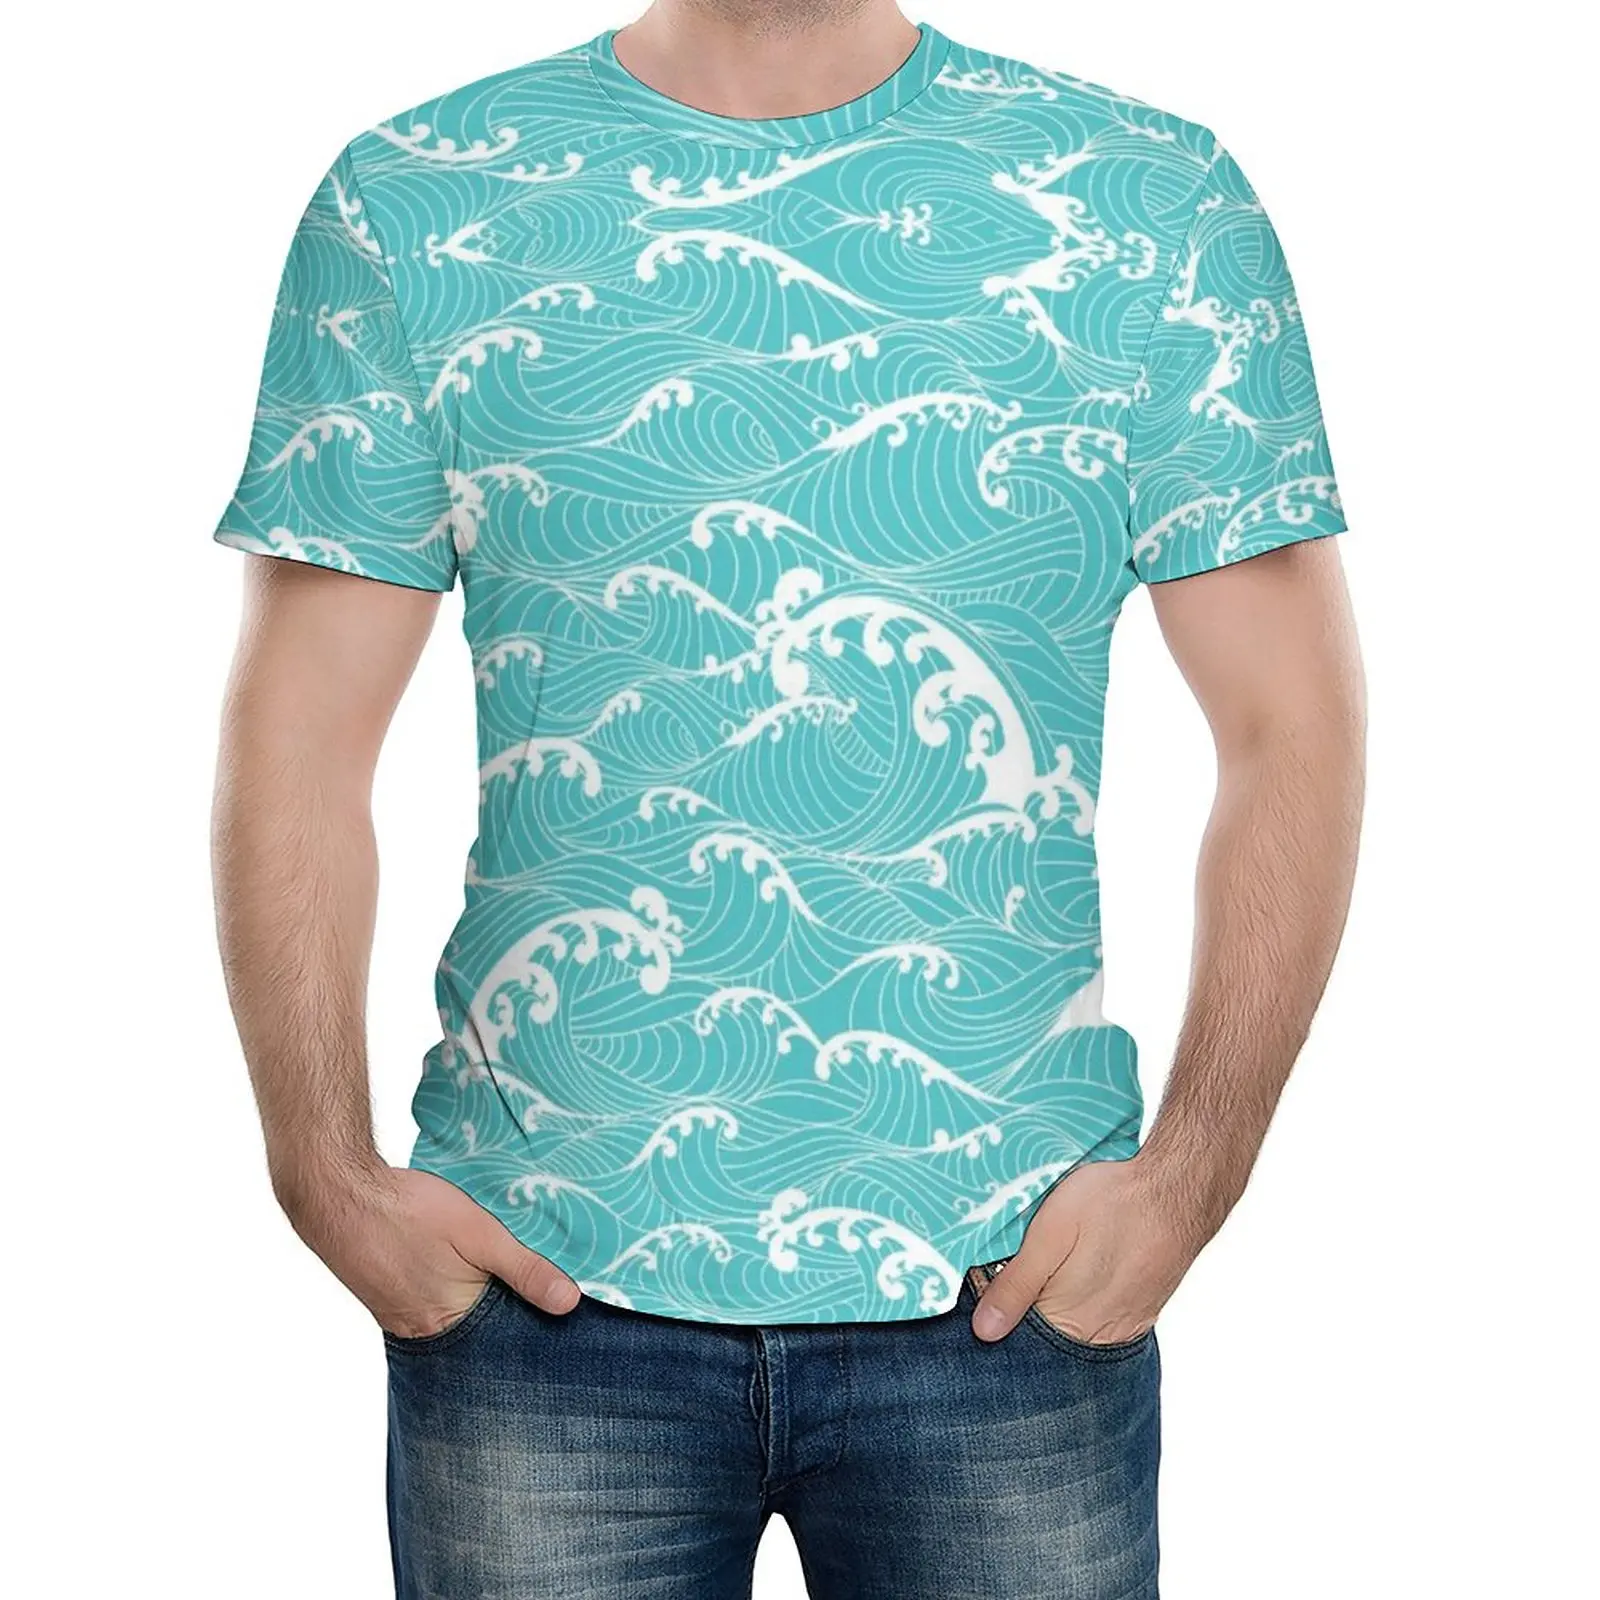 

Graphic Ocean Waves Stripes Pattern Seamless Hand Drawn Asian Style.jpg Tshirt High Quality Fitness Eur Size